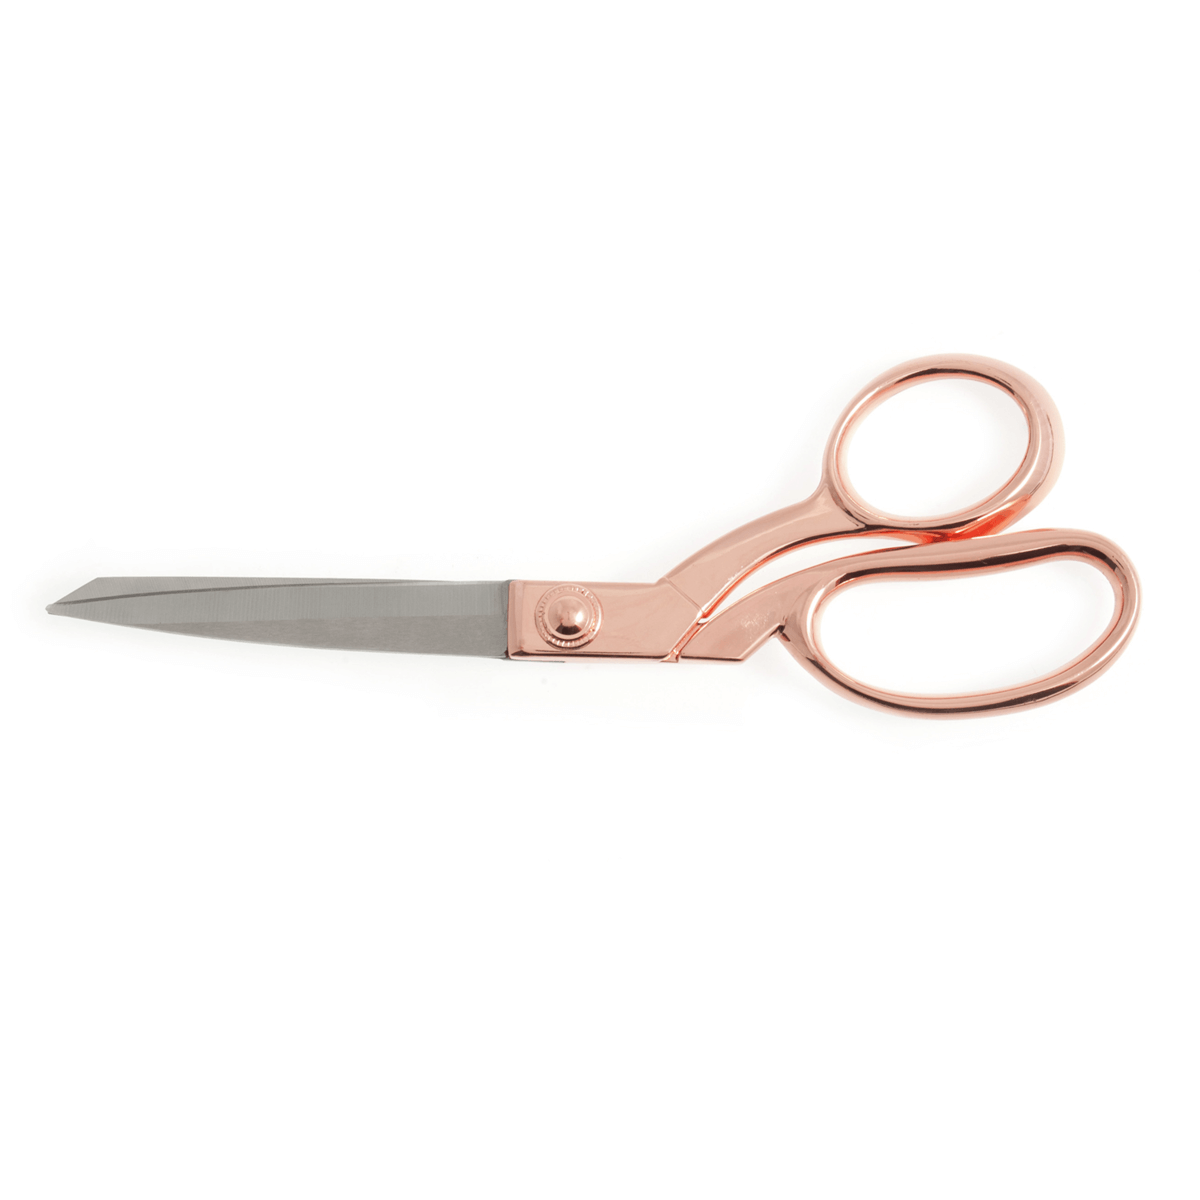 21cm 8.5inch Rose Gold Double Plated Dressmaking Shears Scissors